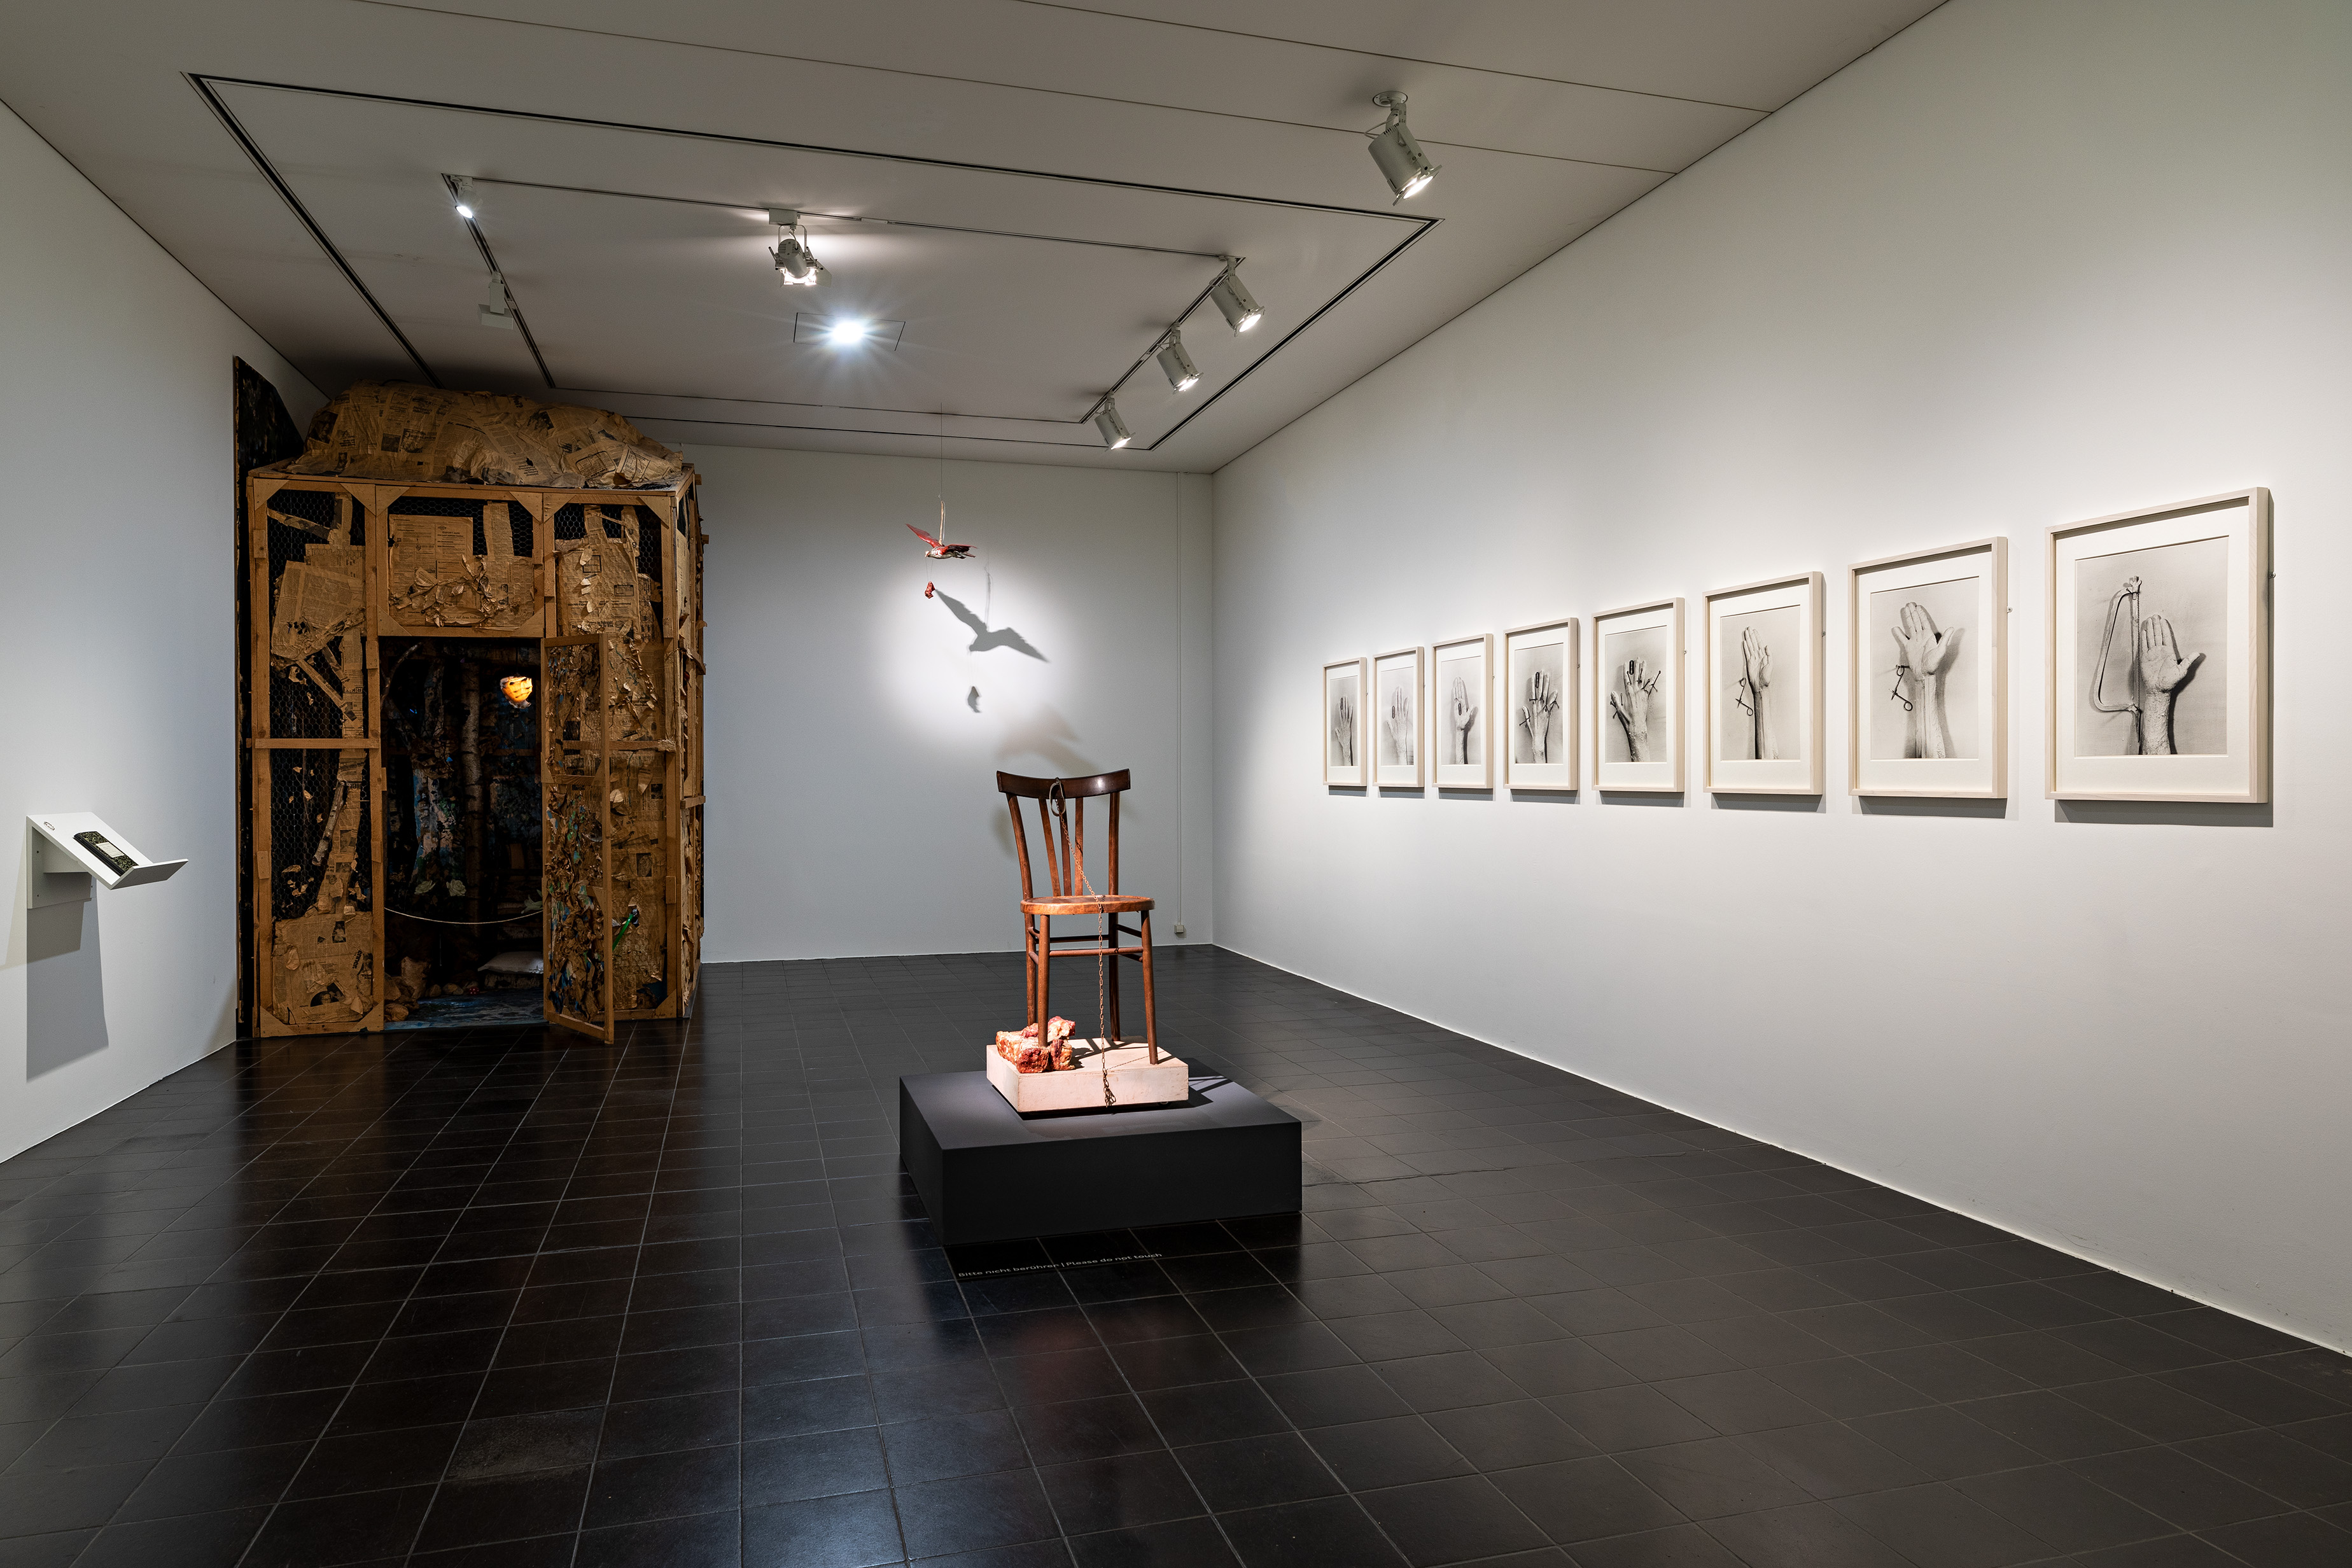 Installationsansicht, Hamburger Kunsthalle 2022, Foto: Fred Dott; V.l.n.r.: Paul Thek, A Station of the Cross, 1972; Untitled (dove with meat piece), 1968; Untitled (chair with meat piece), 1968, © Hamburger Kunsthalle / bpk